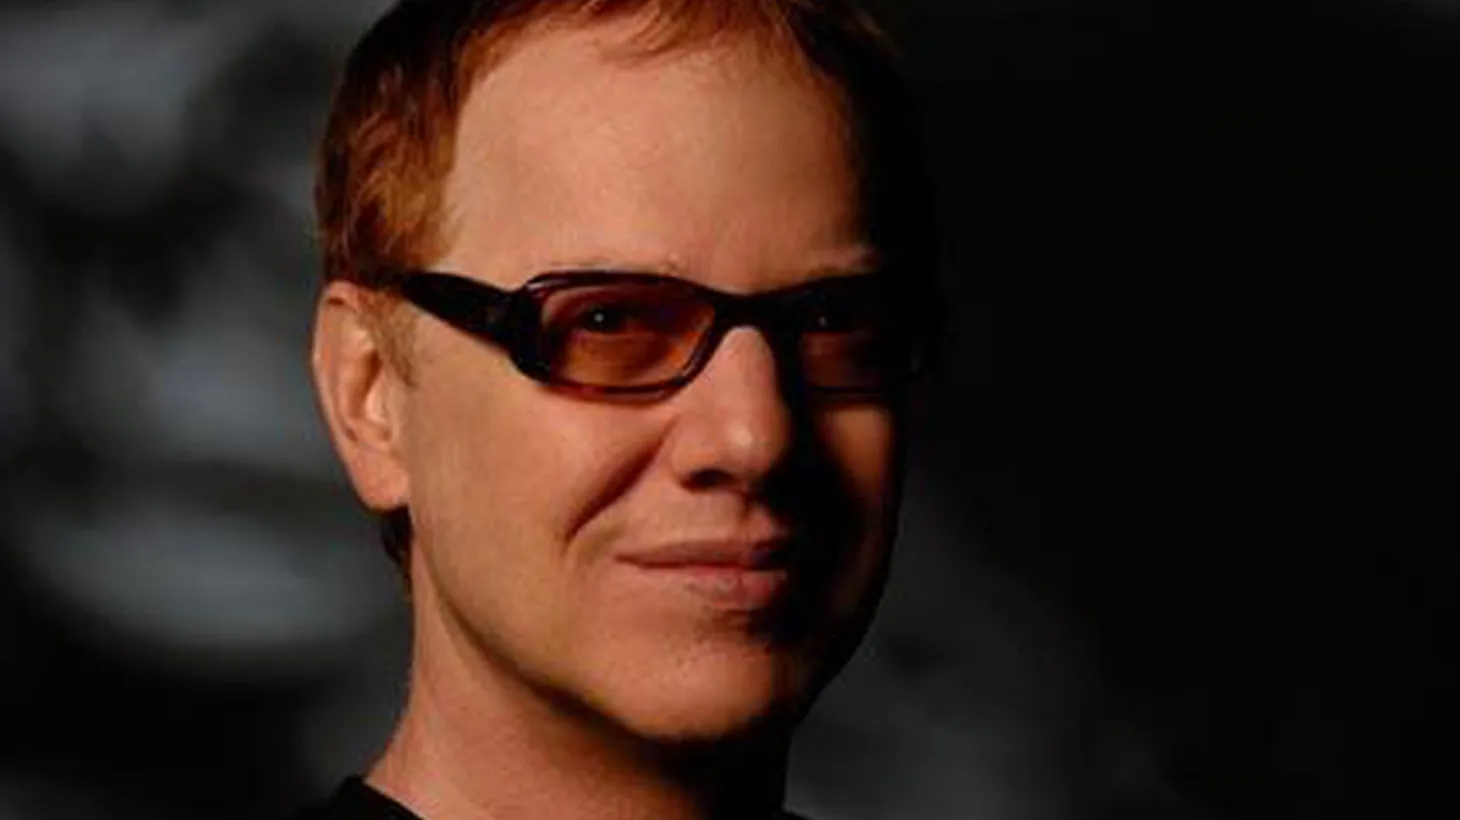 Renowned film composer Danny Elfman joins guest host Chris Douridas to talk about his work with director Tim Burton -- a collaboration that spans 25 years -- highlighting scores to such iconic films as Pee-Wee's Big Adventure to the more recent Alice In Wonderland. Hear it live on Morning Becomes Eclectic at 11:30am.